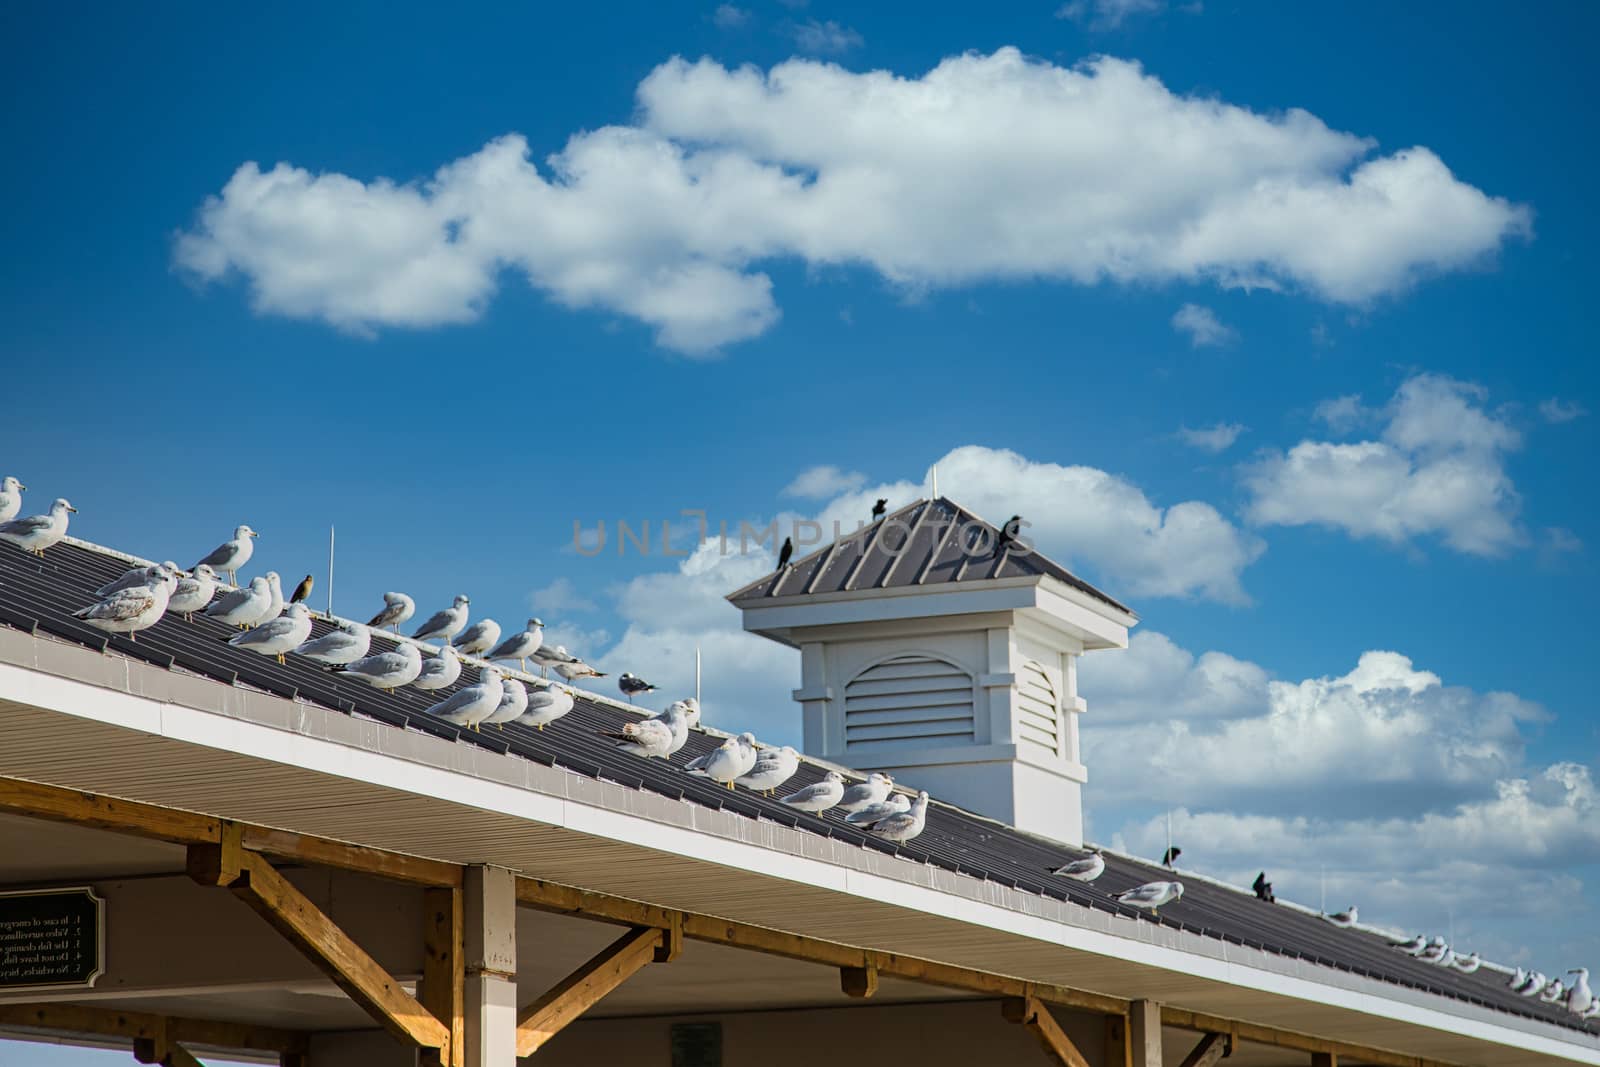 Seagulls on Roof of Pier by dbvirago